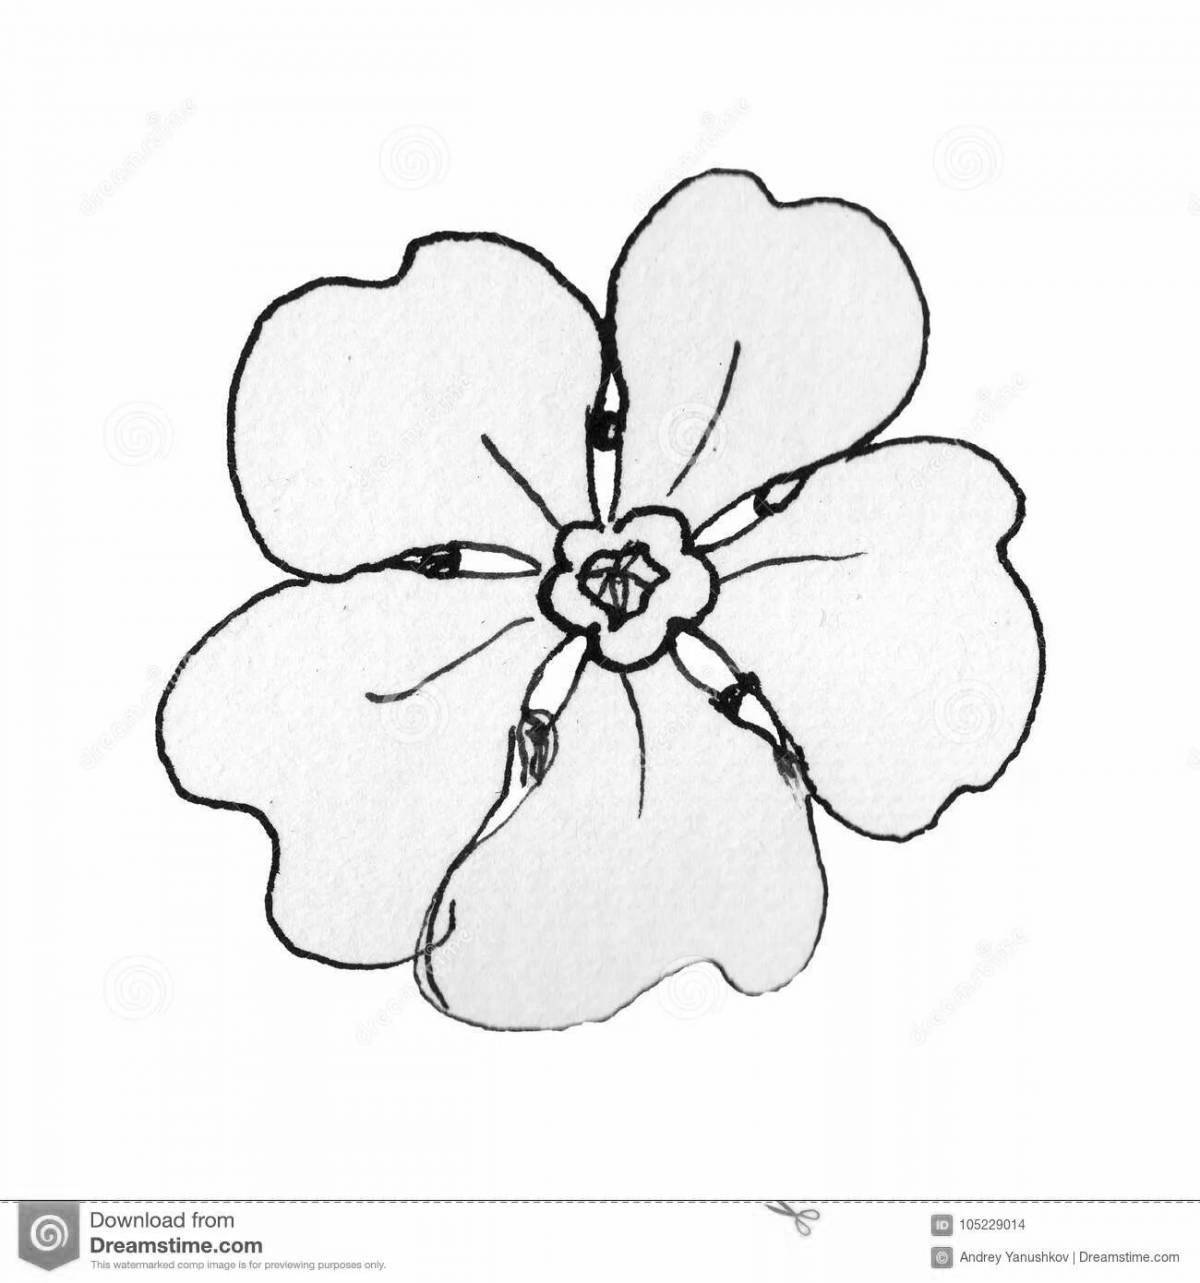 Charming forget-me-not flower coloring book